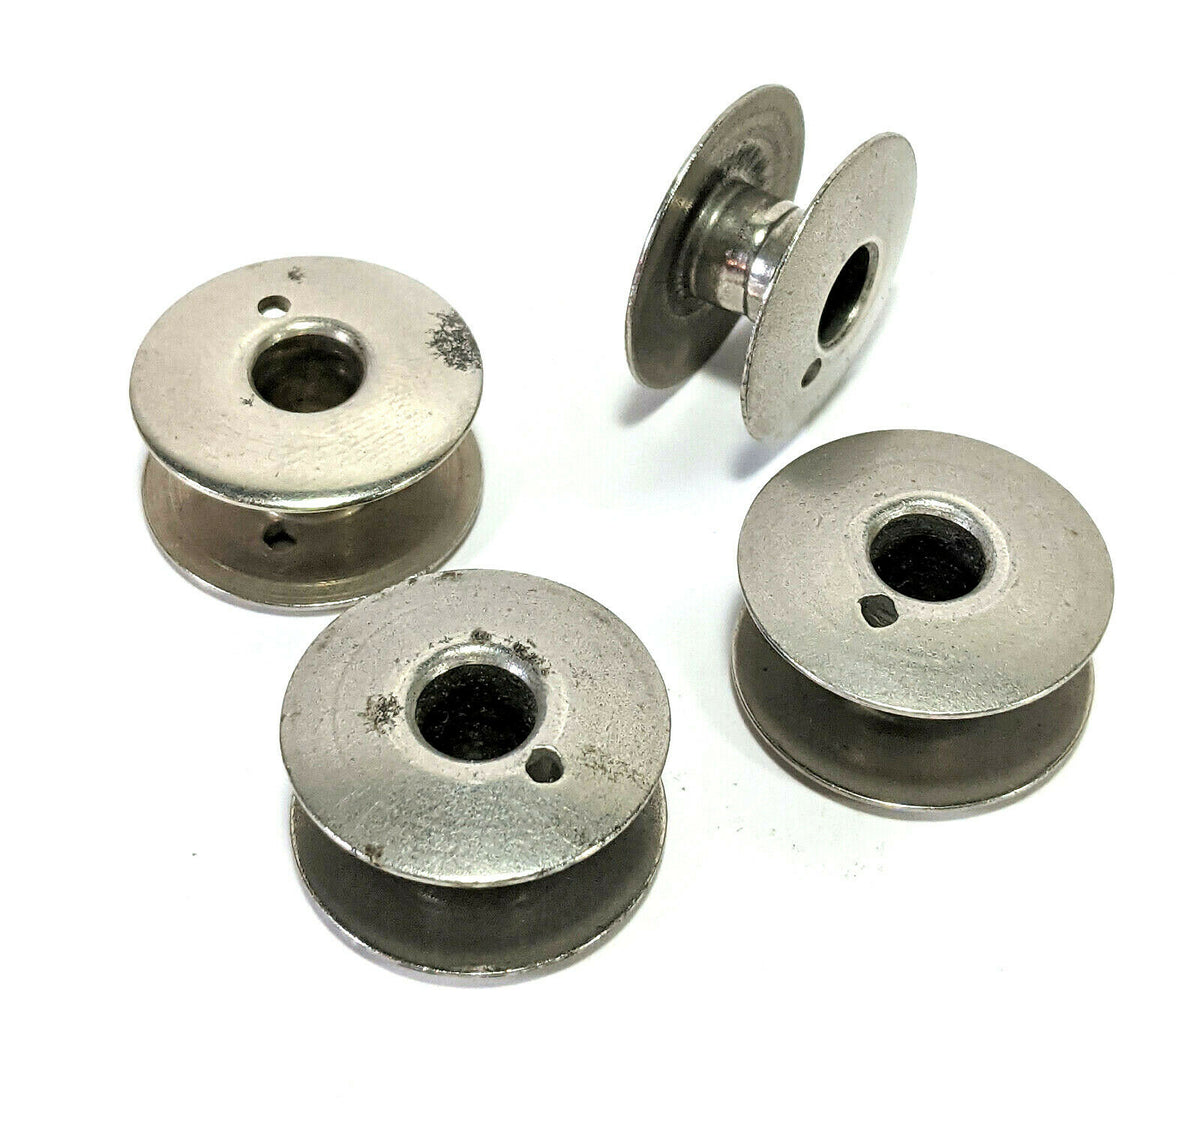 Blister of 5 rounded bobbins, for sewing machines, in 66 K steel